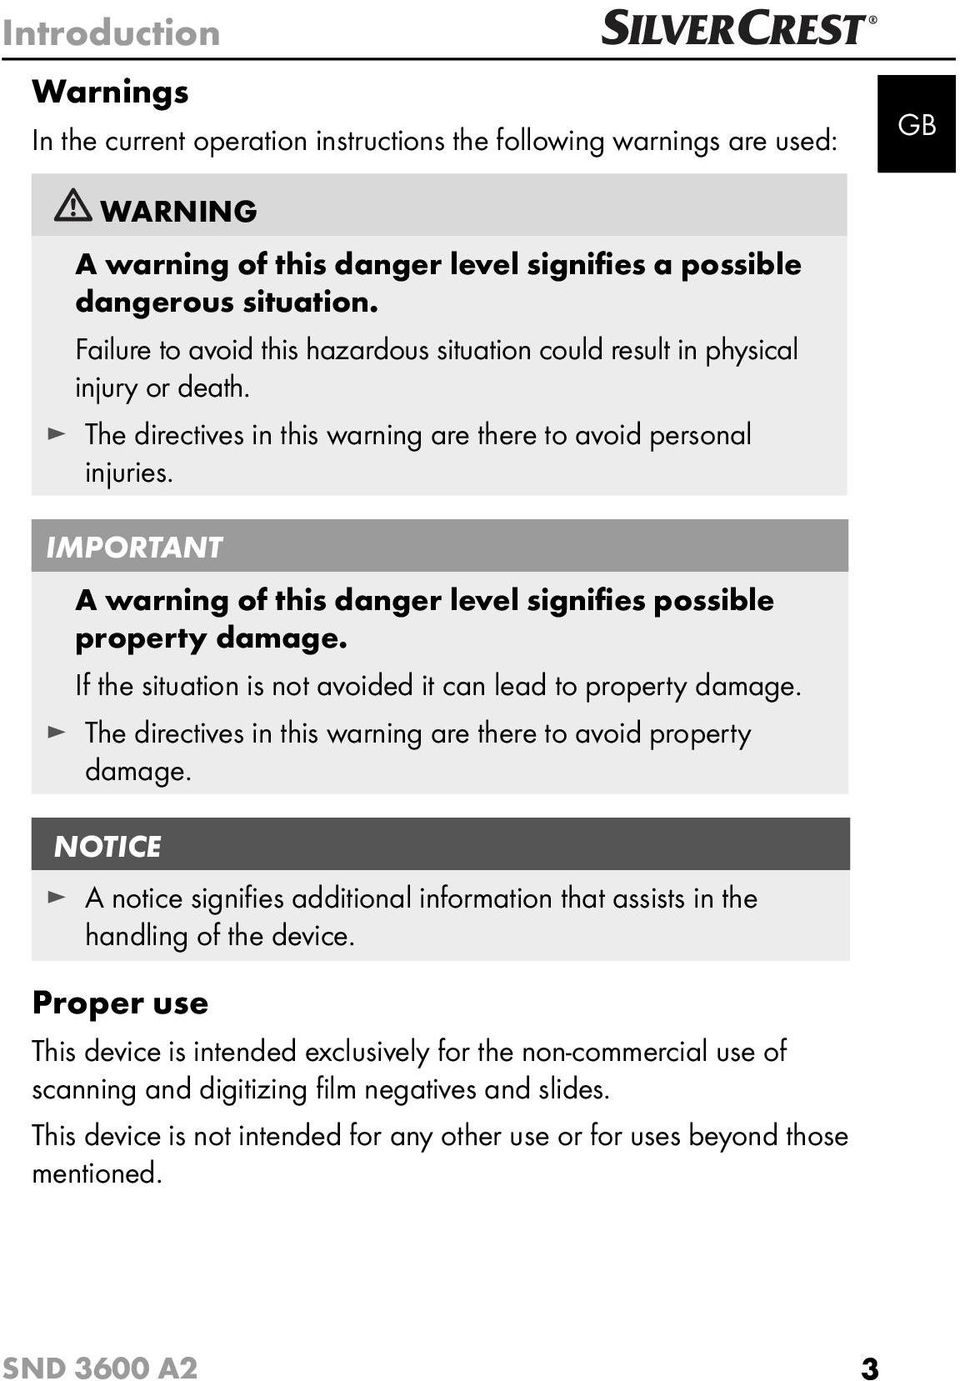 IMPORTANT A warning of this danger level signifies possible property damage. If the situation is not avoided it can lead to property damage.